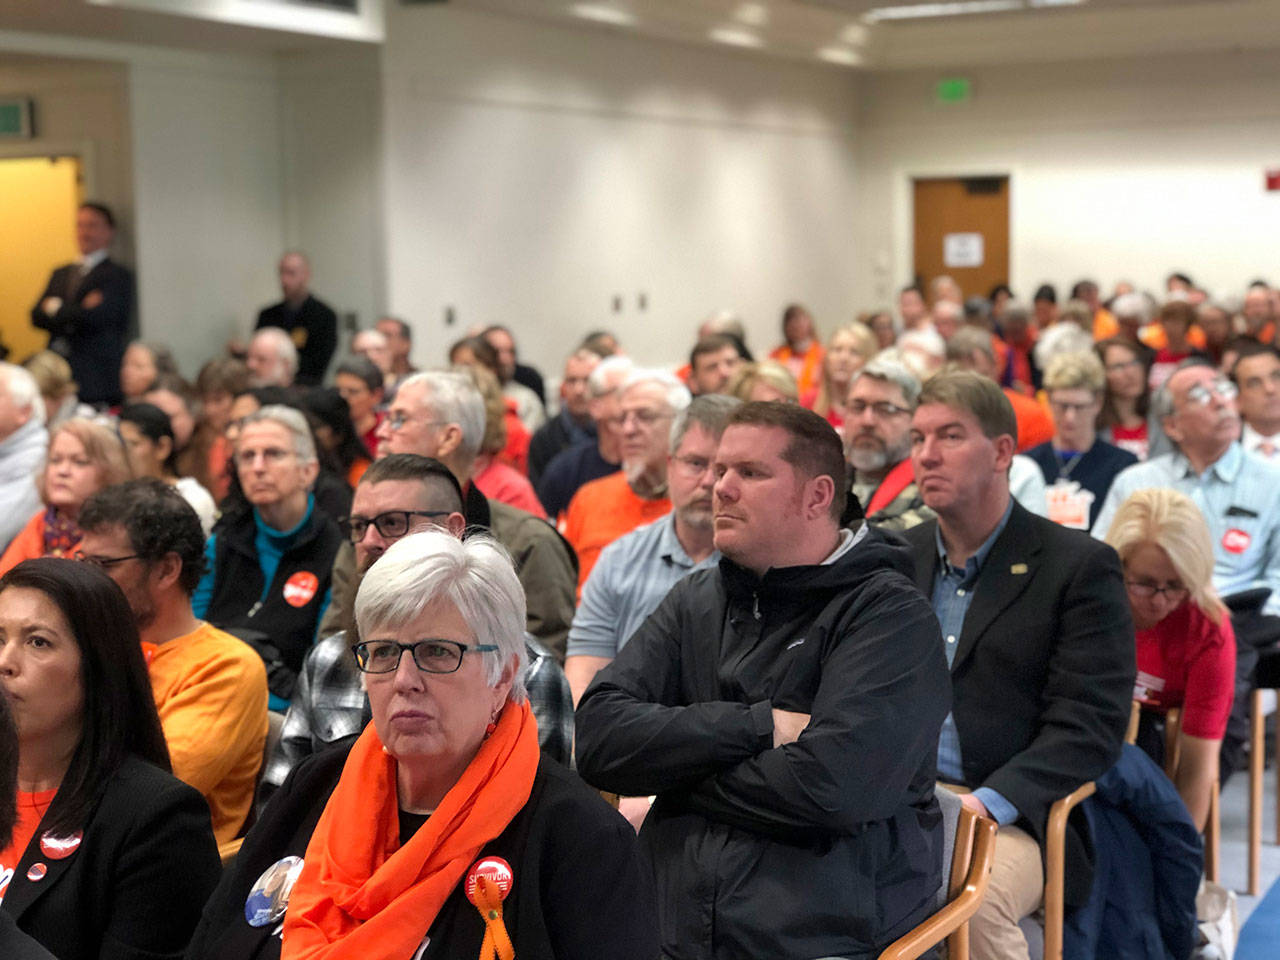 Washington residents listen during a state Senate Law and Justice Committee hearing on a proposed ban on high capacity gun magazines. Many wore orange in support of gun safety. (Leona Vaughn/WNPA News Service)